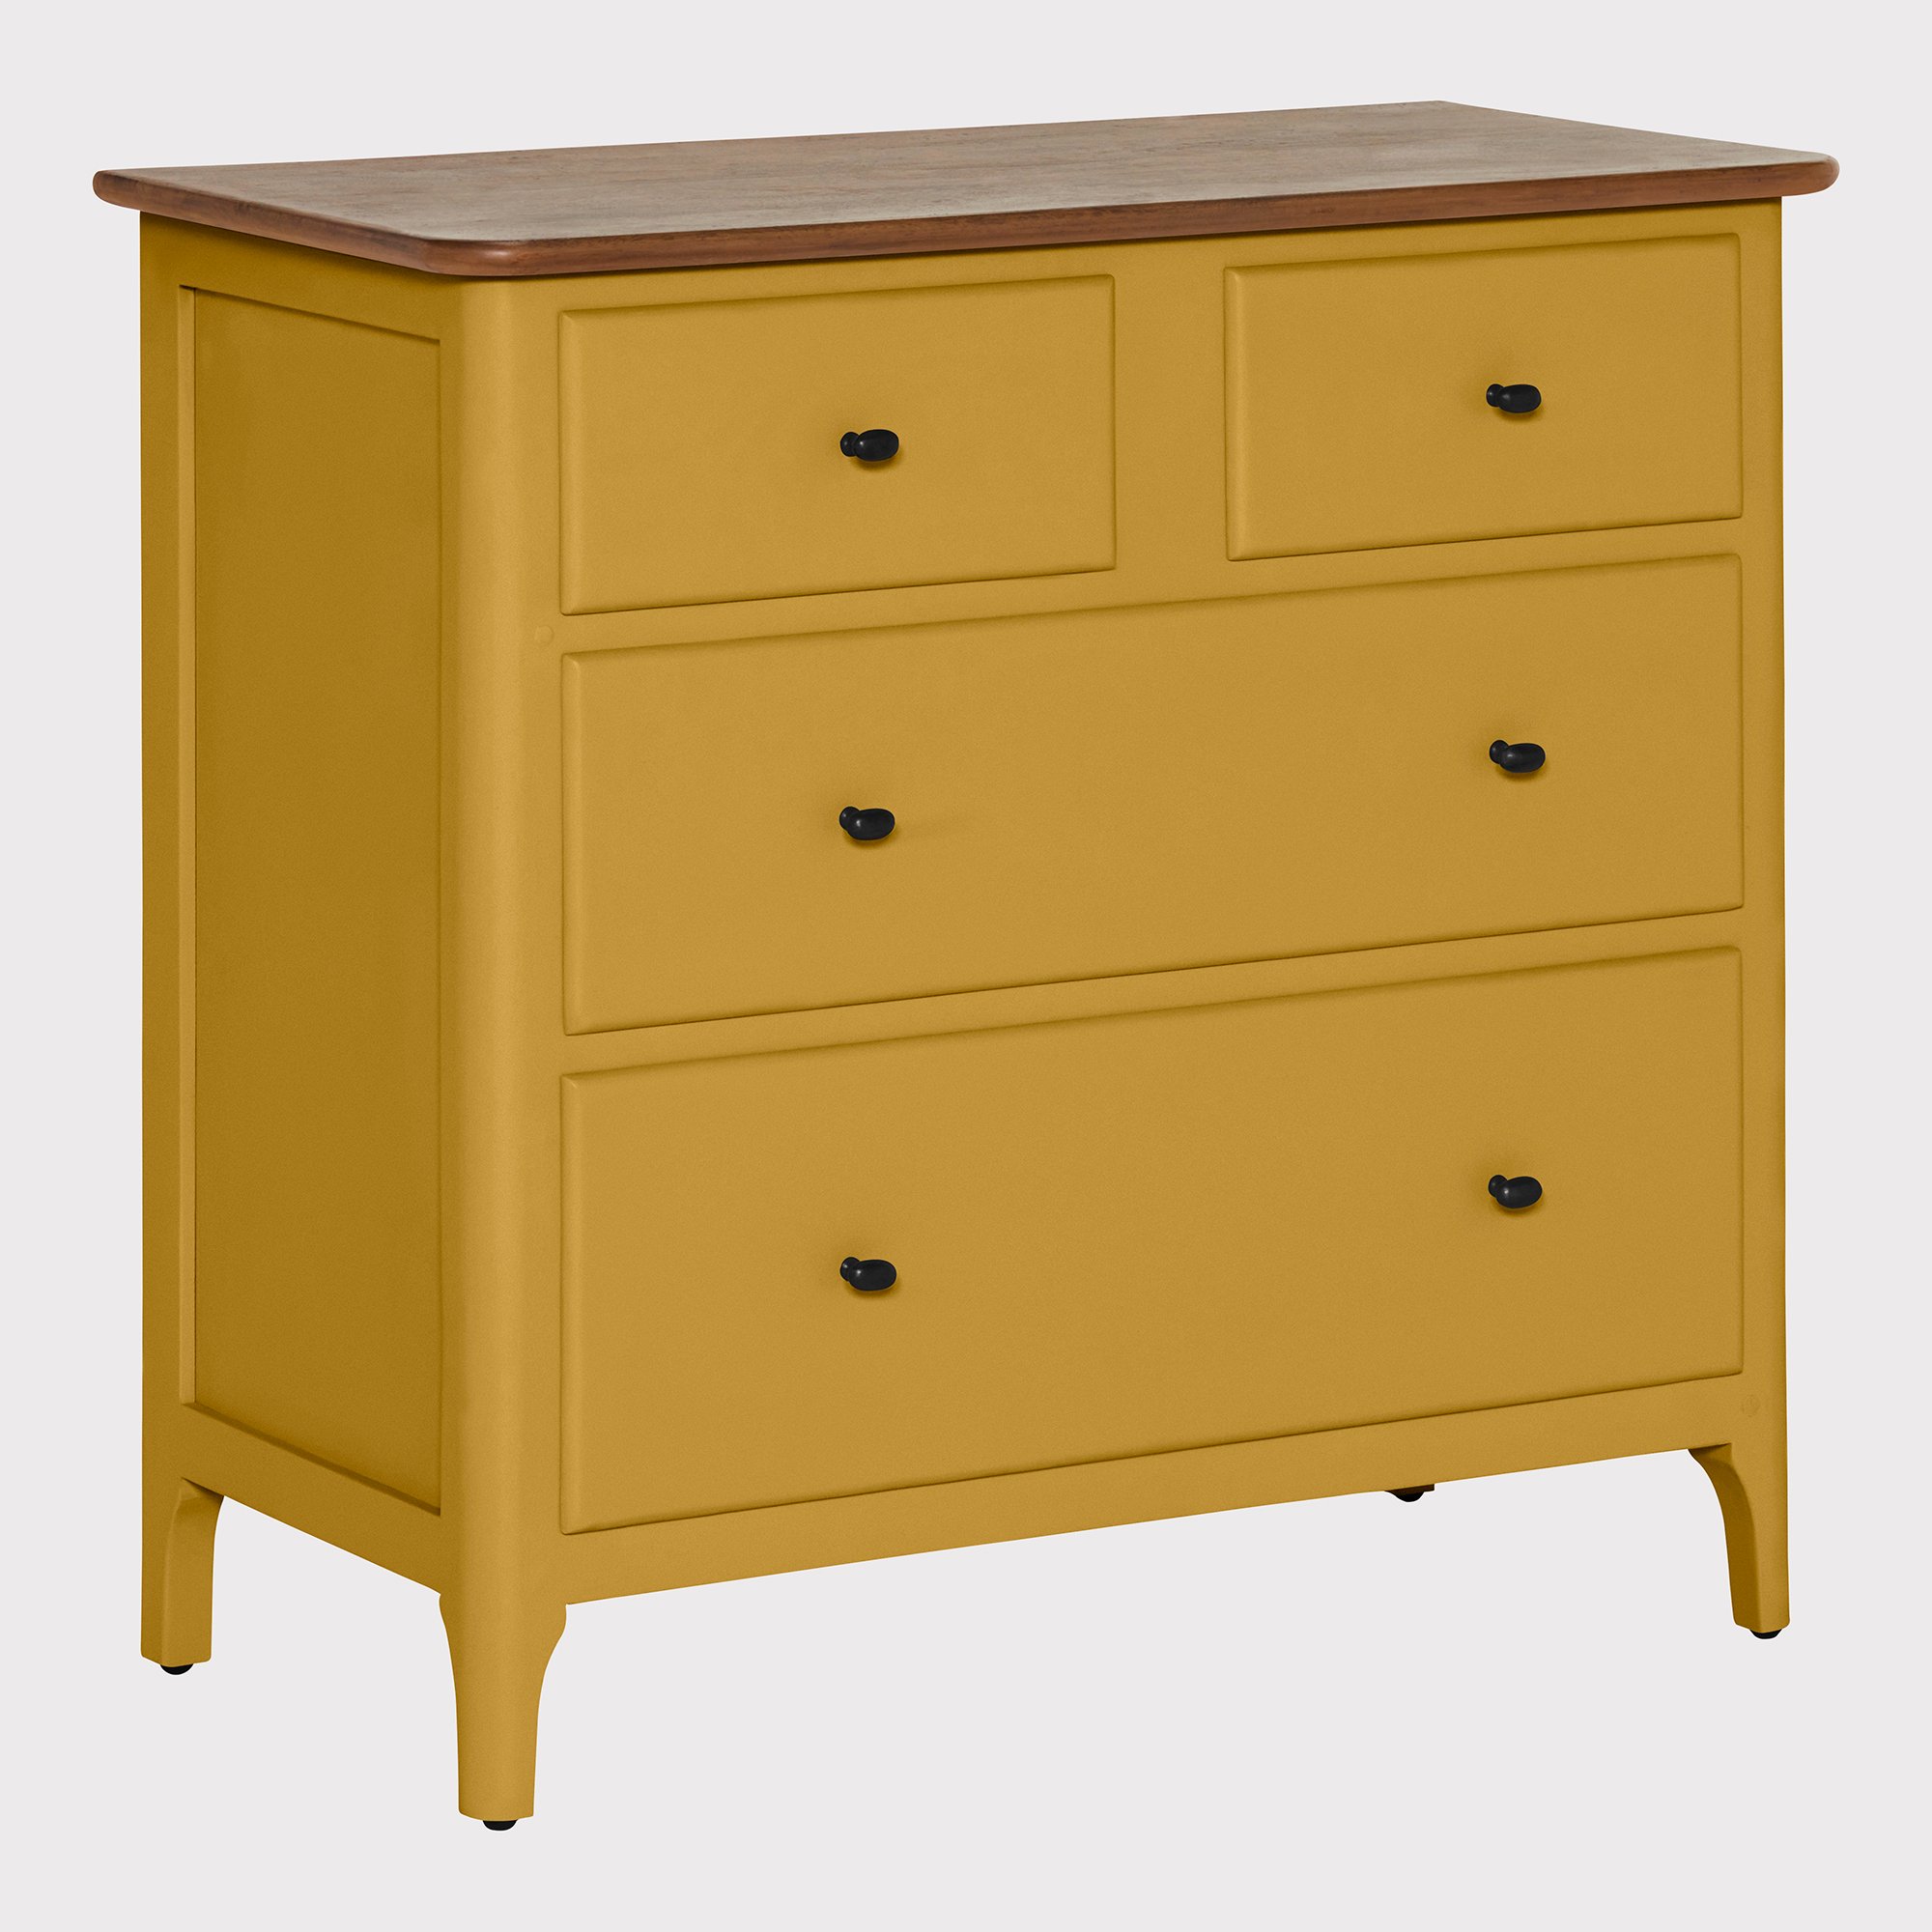 Painted Collection Oakley 4 Drawer Chest, Yellow | Barker & Stonehouse